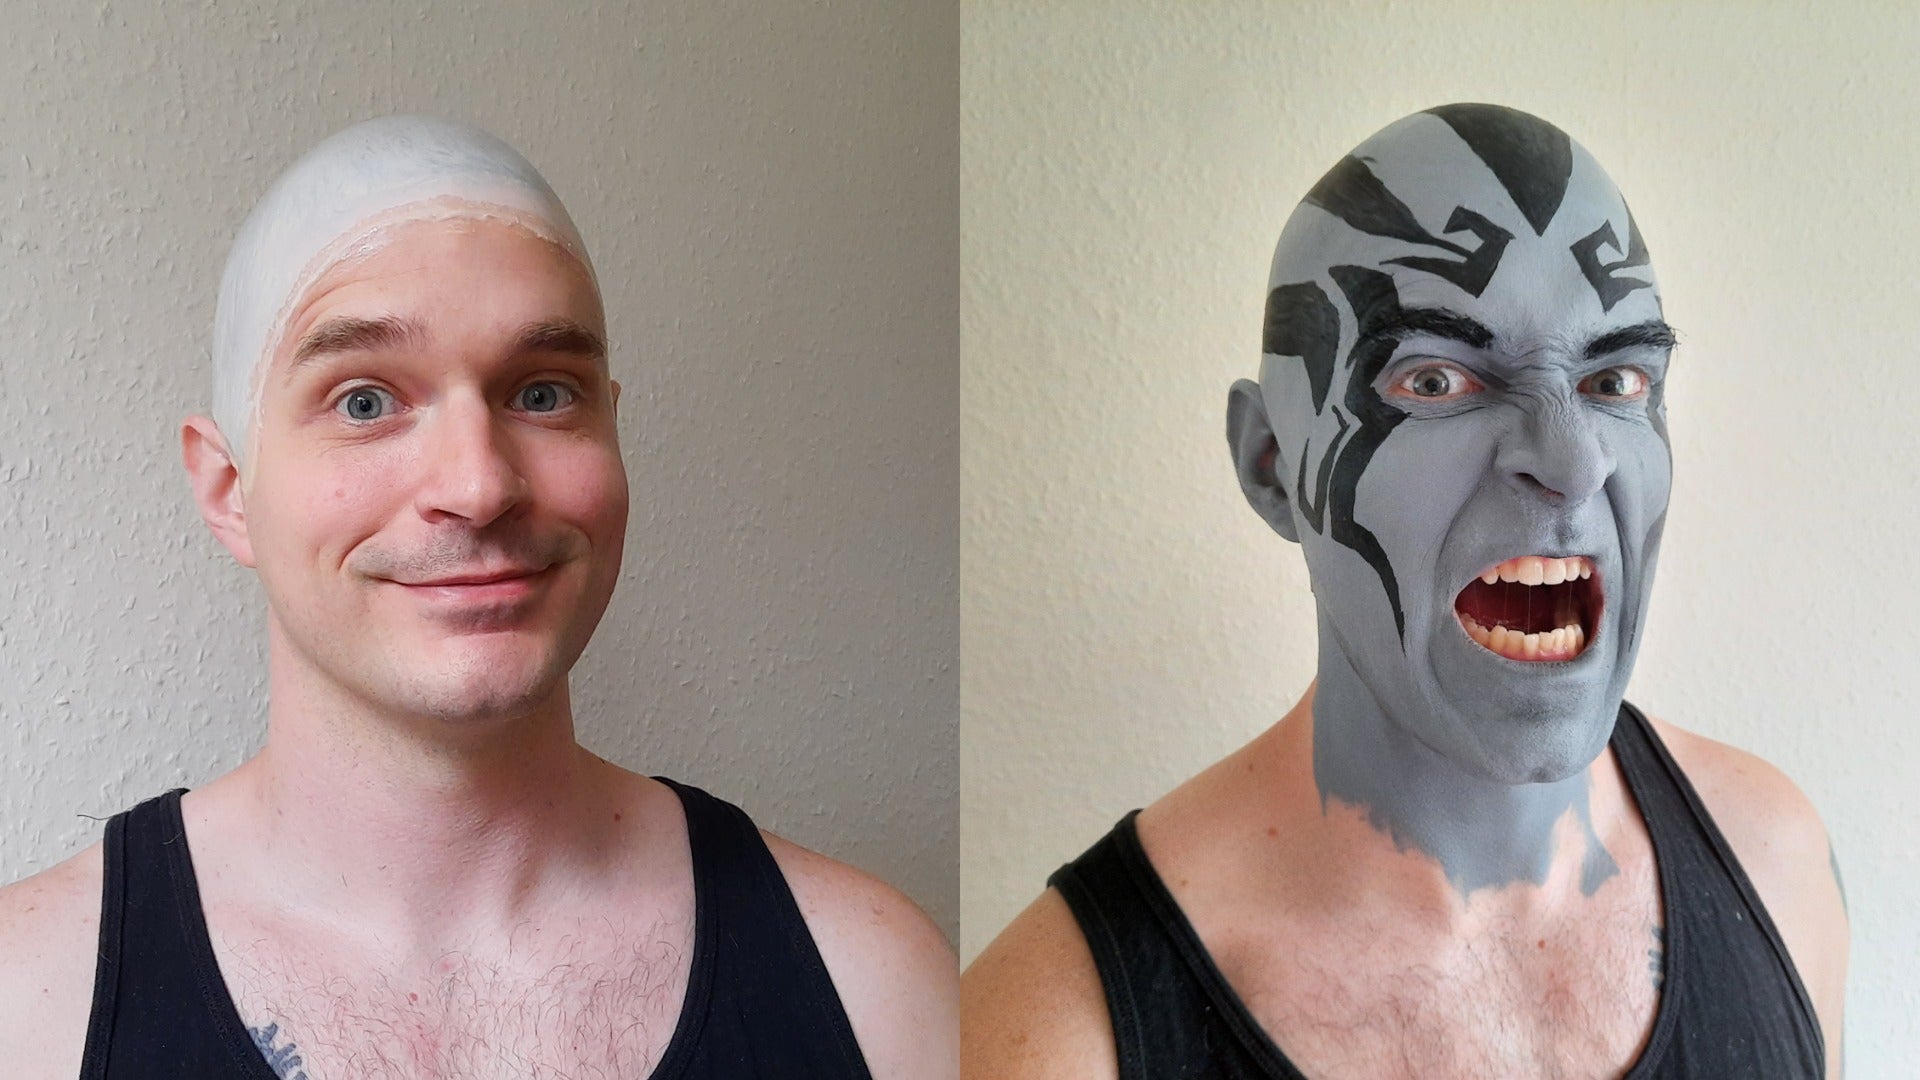 How To Apply A Bald Cap For Cosplays And Makeup Tests | Cosplay Central